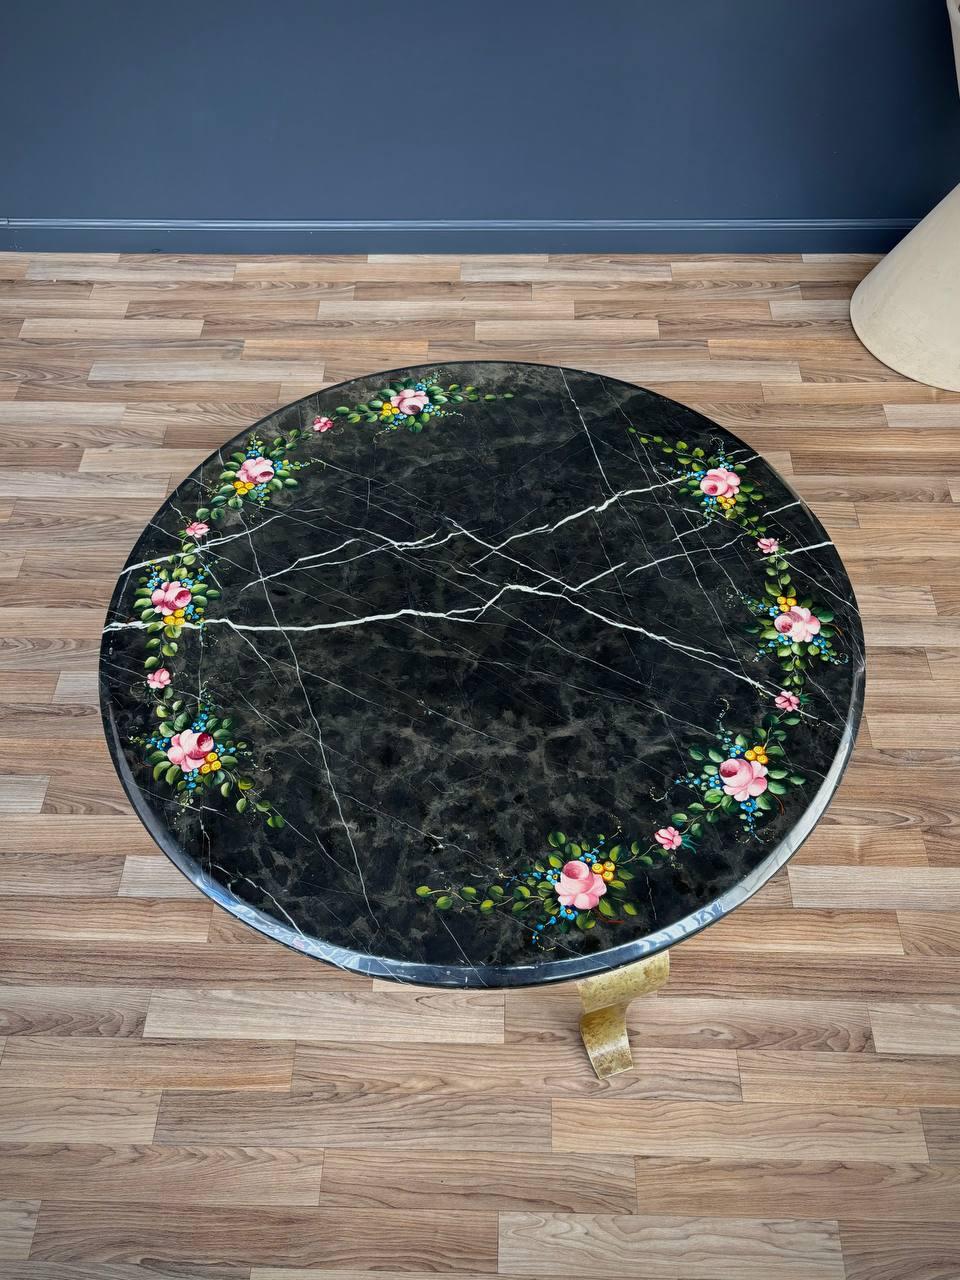 Arturo Pani Painted Onyx & Brass Coffee Table for Guy Muller In Good Condition For Sale In Los Angeles, CA